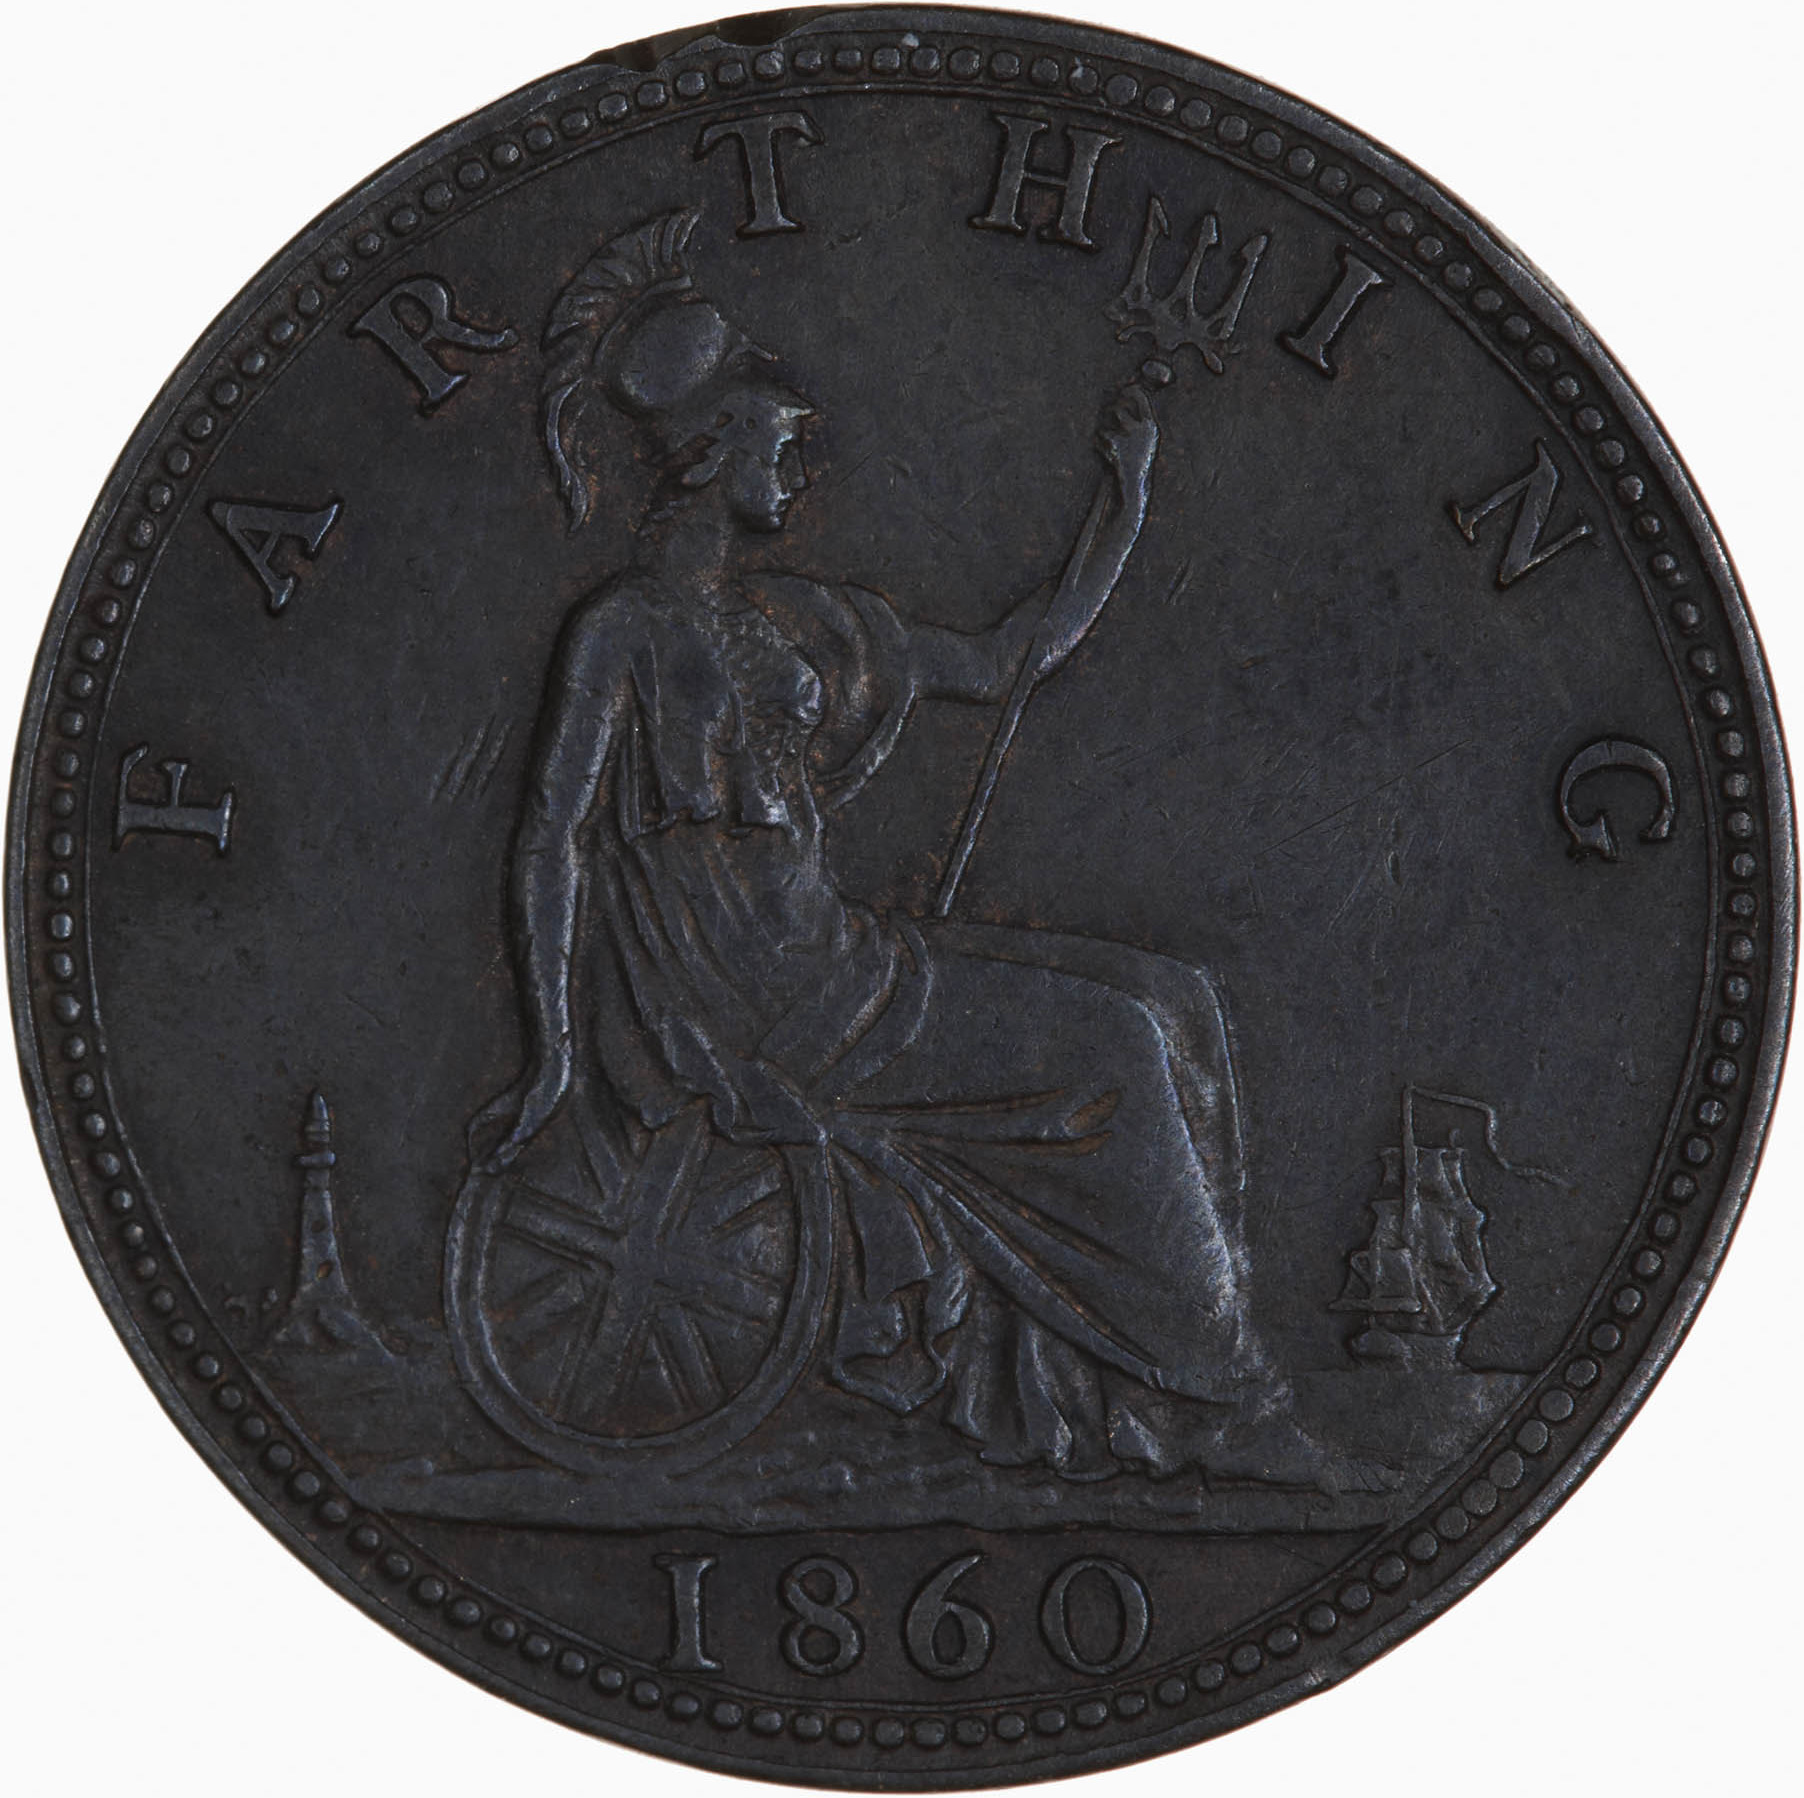 1860 farthing reverse A